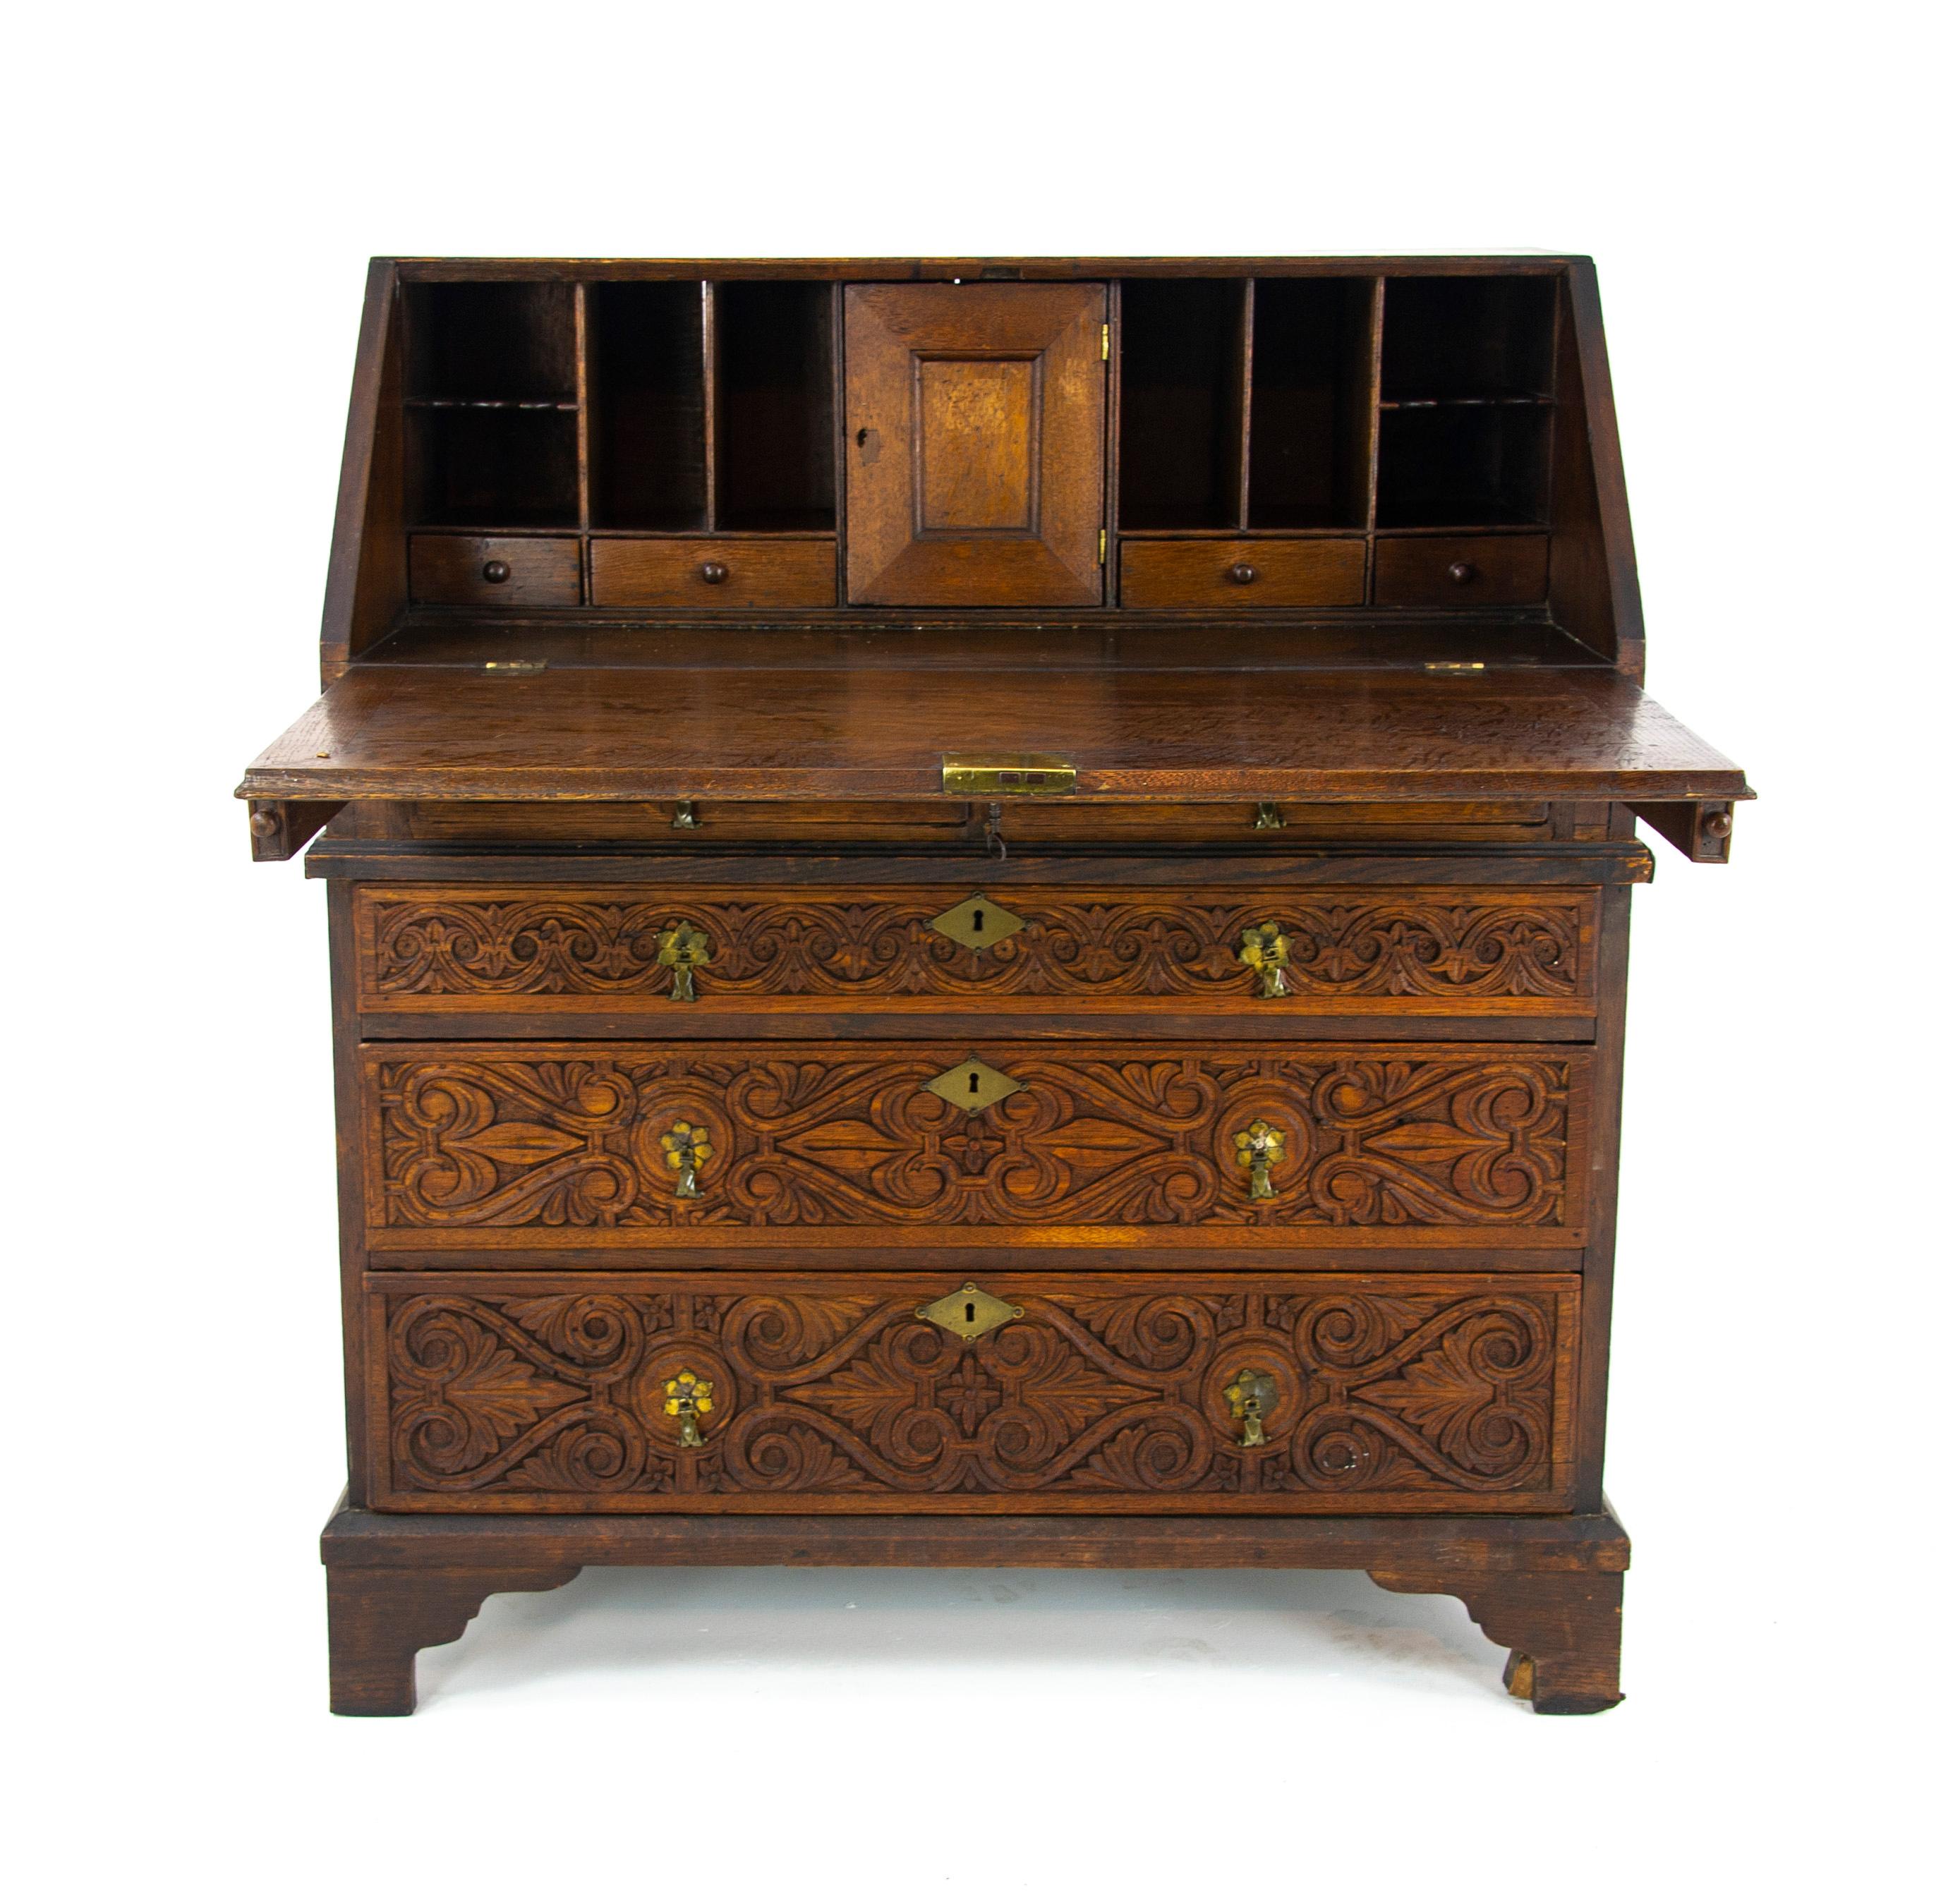 Antique oak desk, 18th century carved oak slant front bureau, Antique furniture, Scotland 1780, B1446

Scotland 1780
All original condition
Rectangular top
Fall front with figural carving and brass escutcheon
Opens to reveal eight pigeon